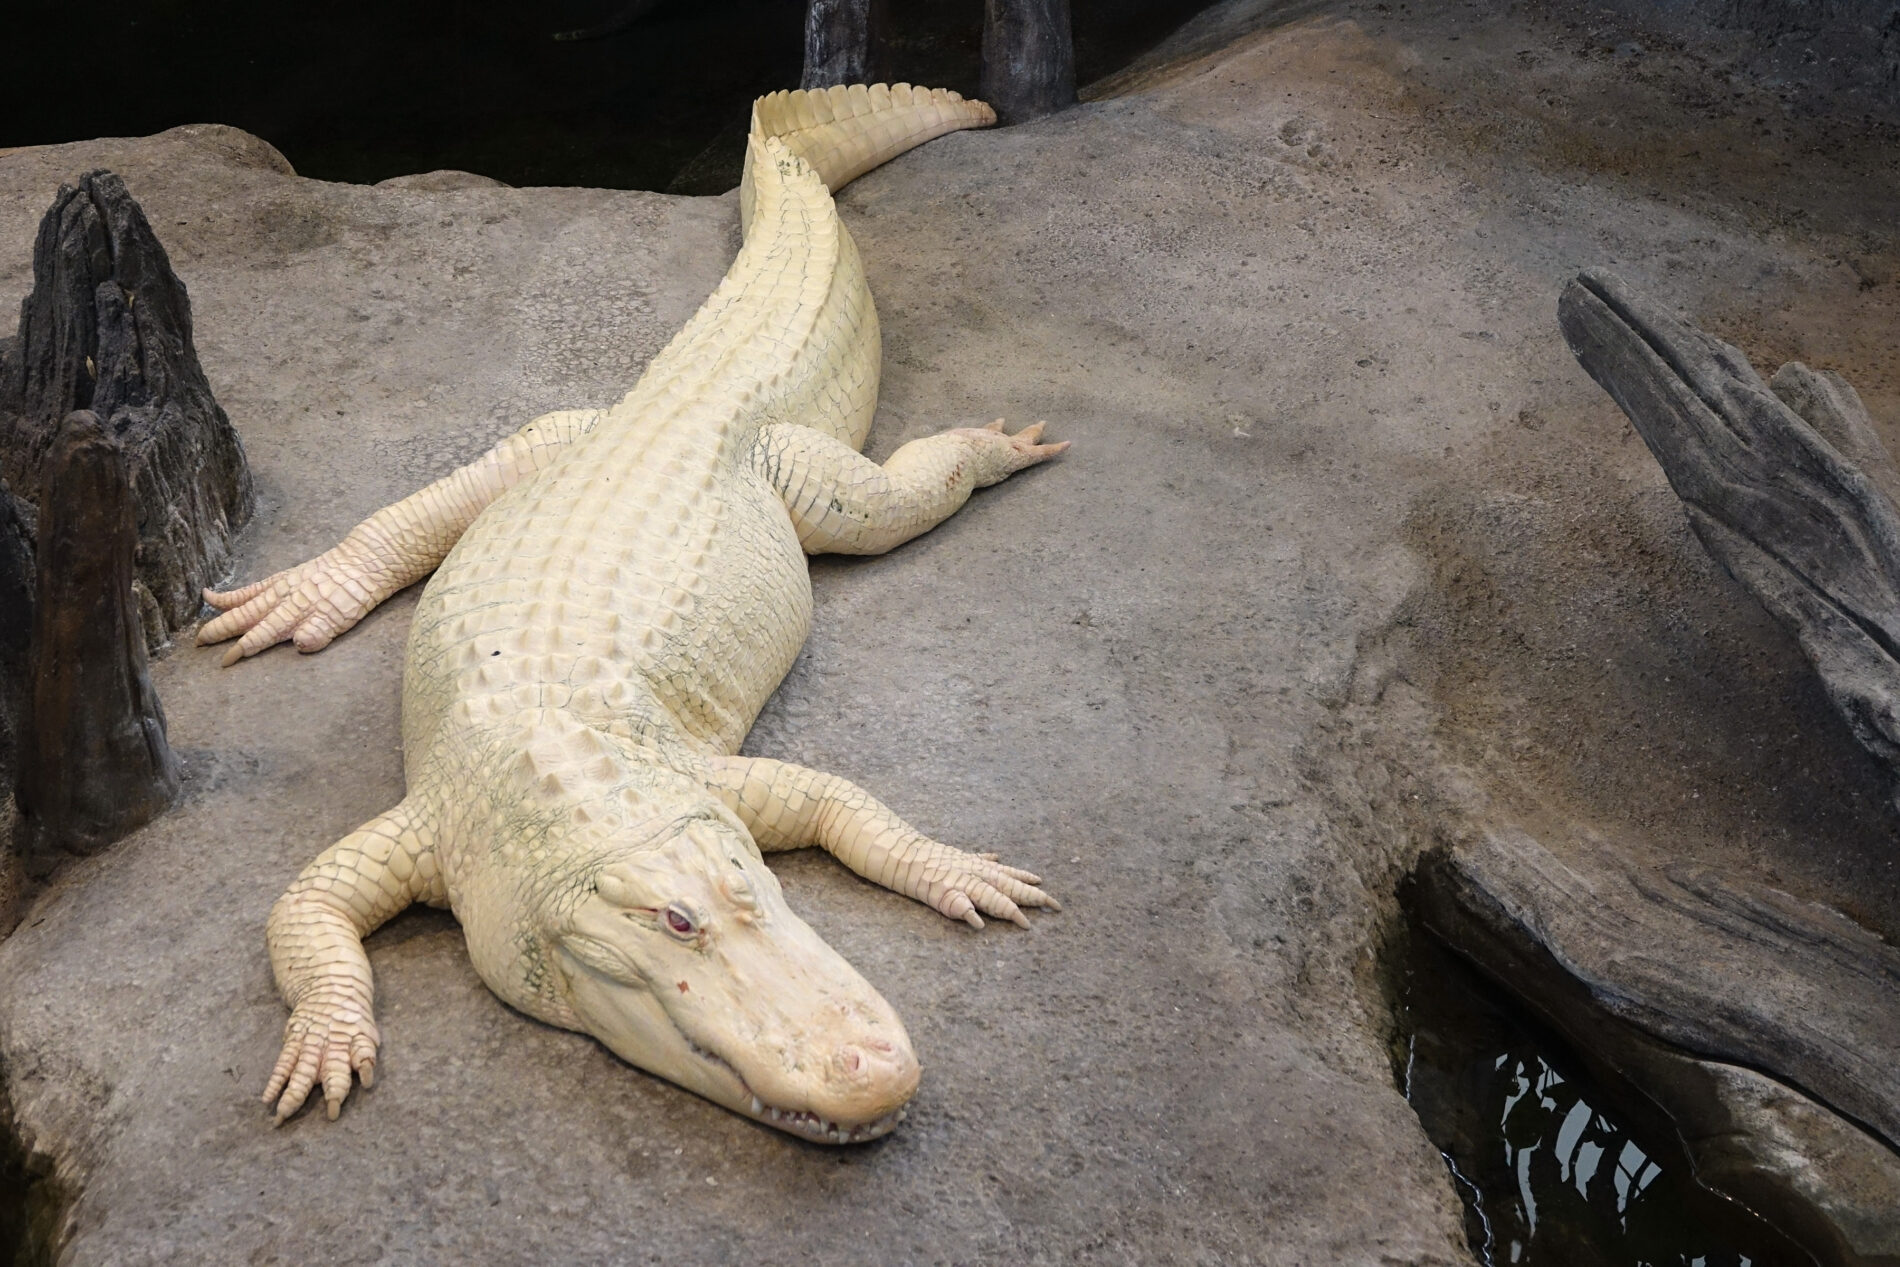 White alligator at the California Academy of Sciences. His name is Claude.